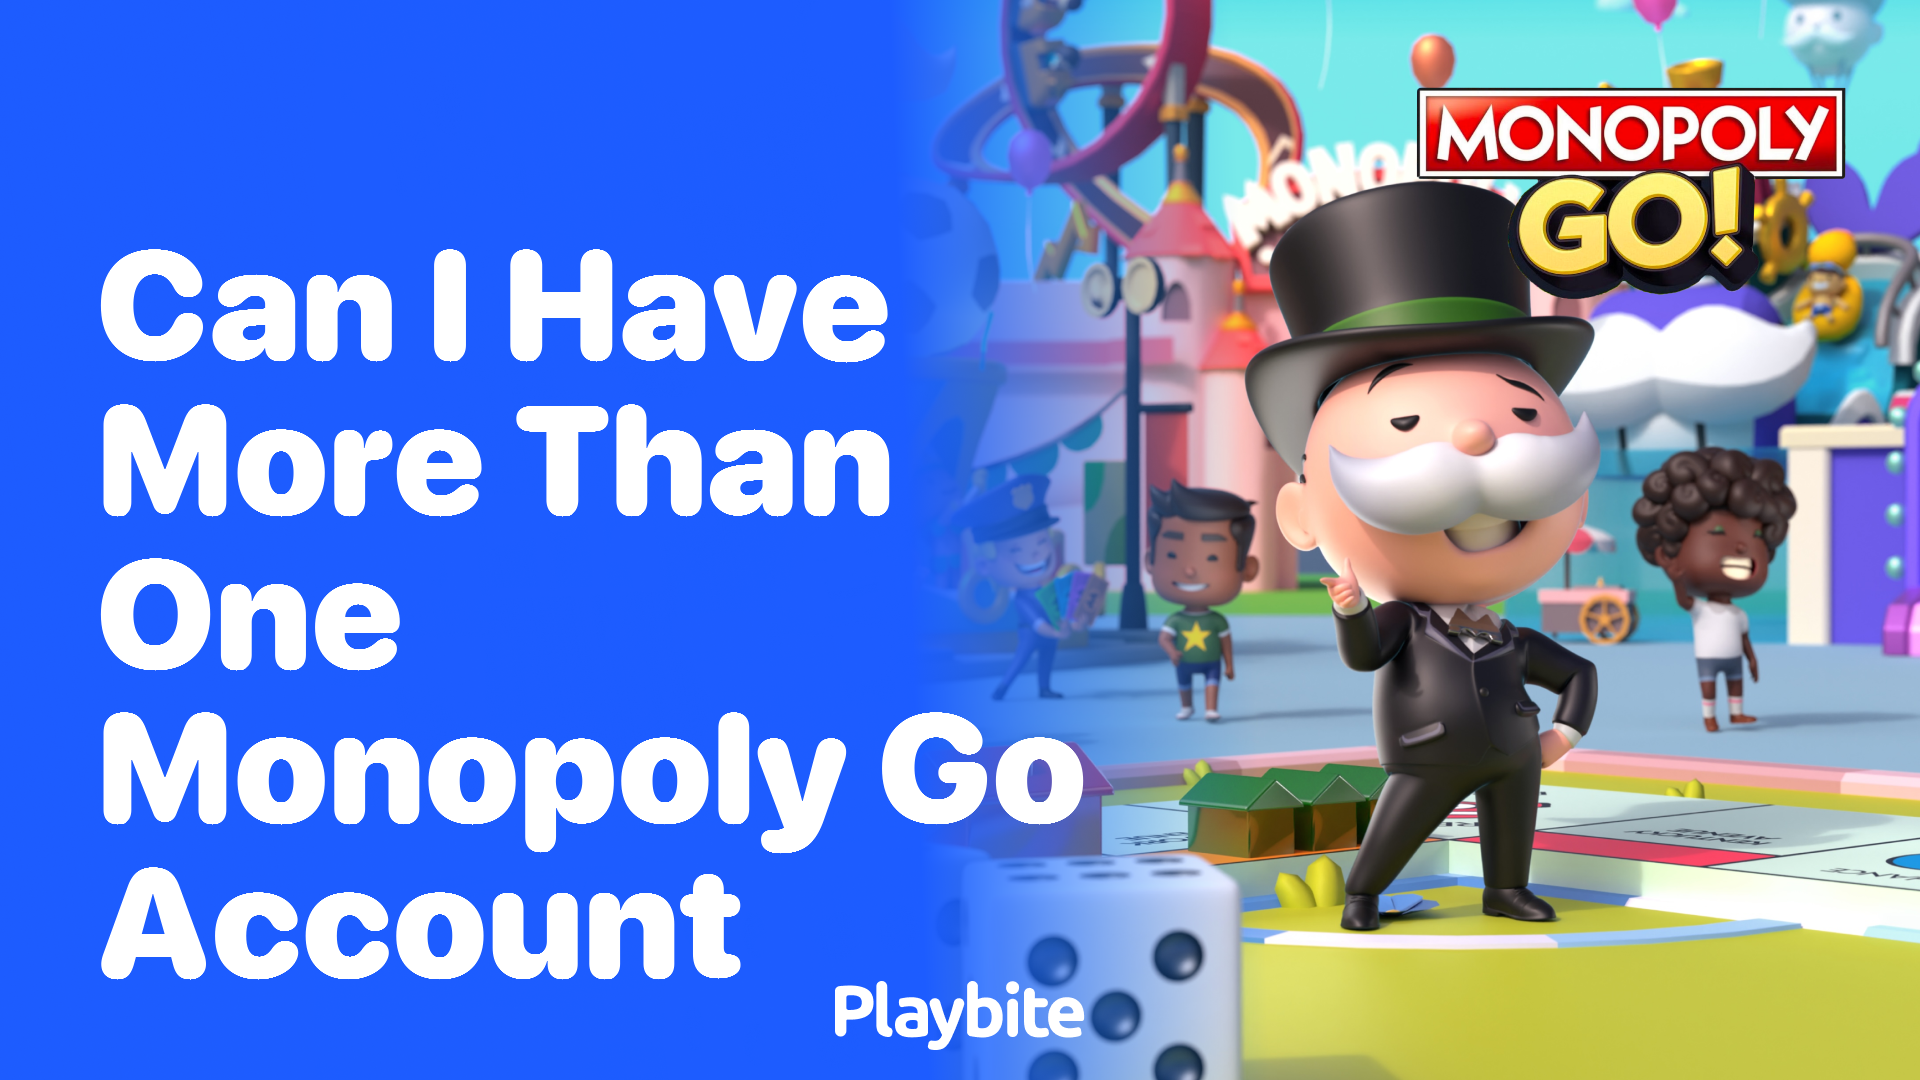 Can I Have More Than One Monopoly Go Account?